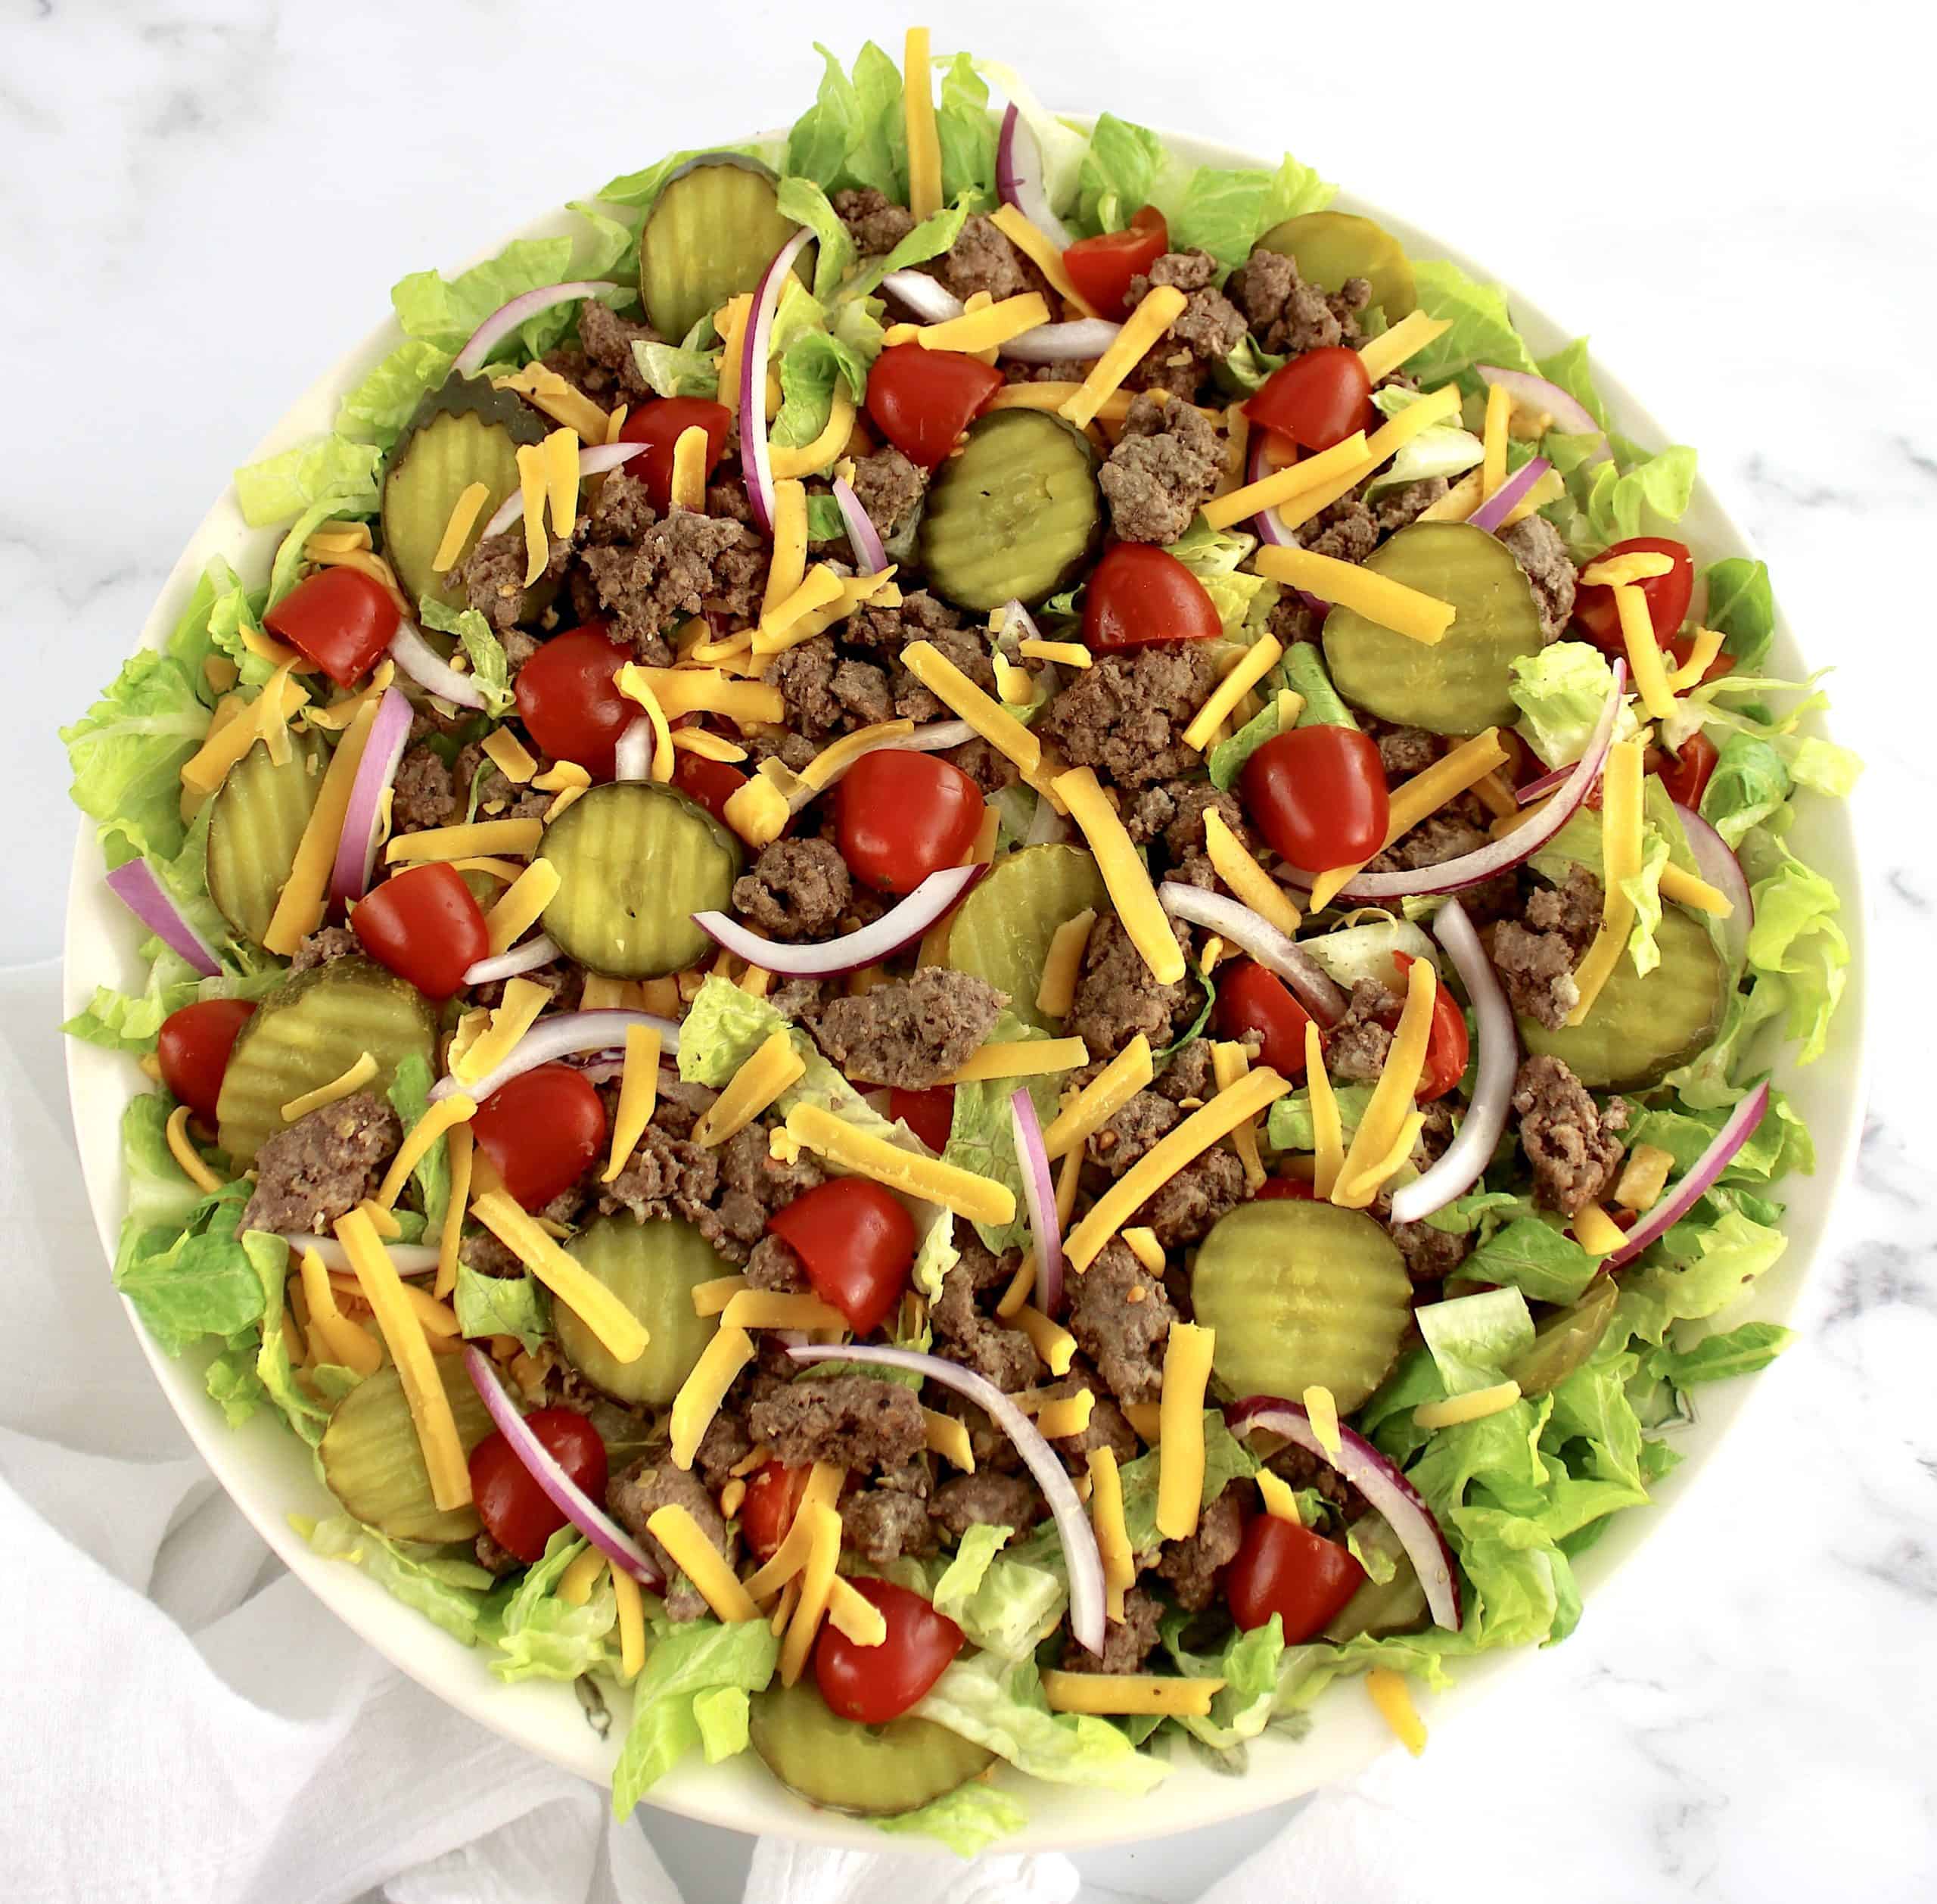 Big Mac Cheeseburger Salad in beige bowl without dressing